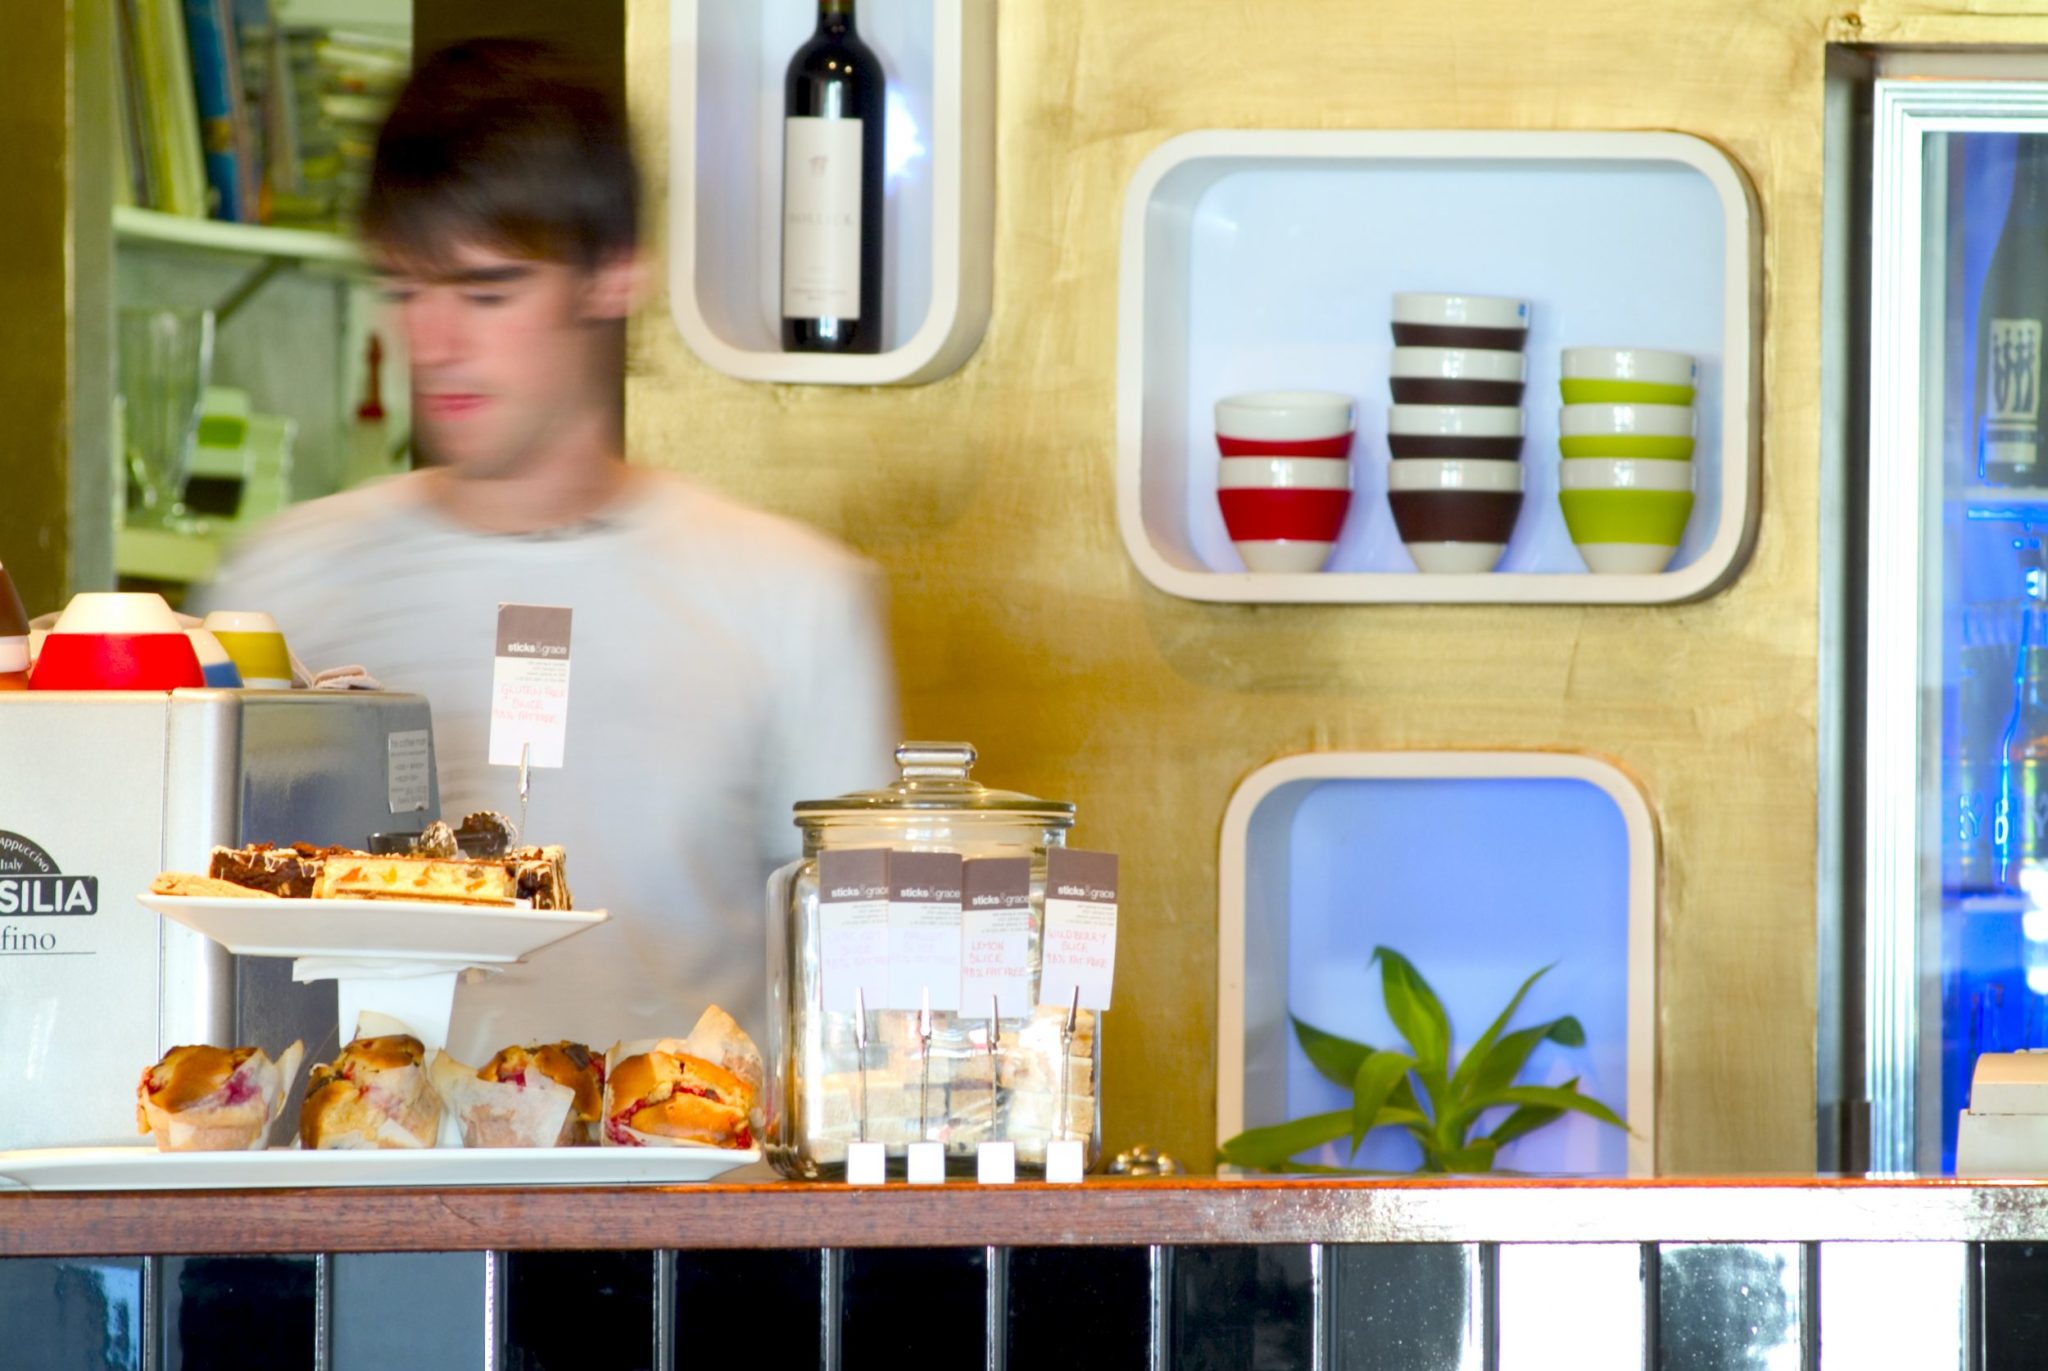 Cafe counter with cakes and coffee maching, with barista face blurred out